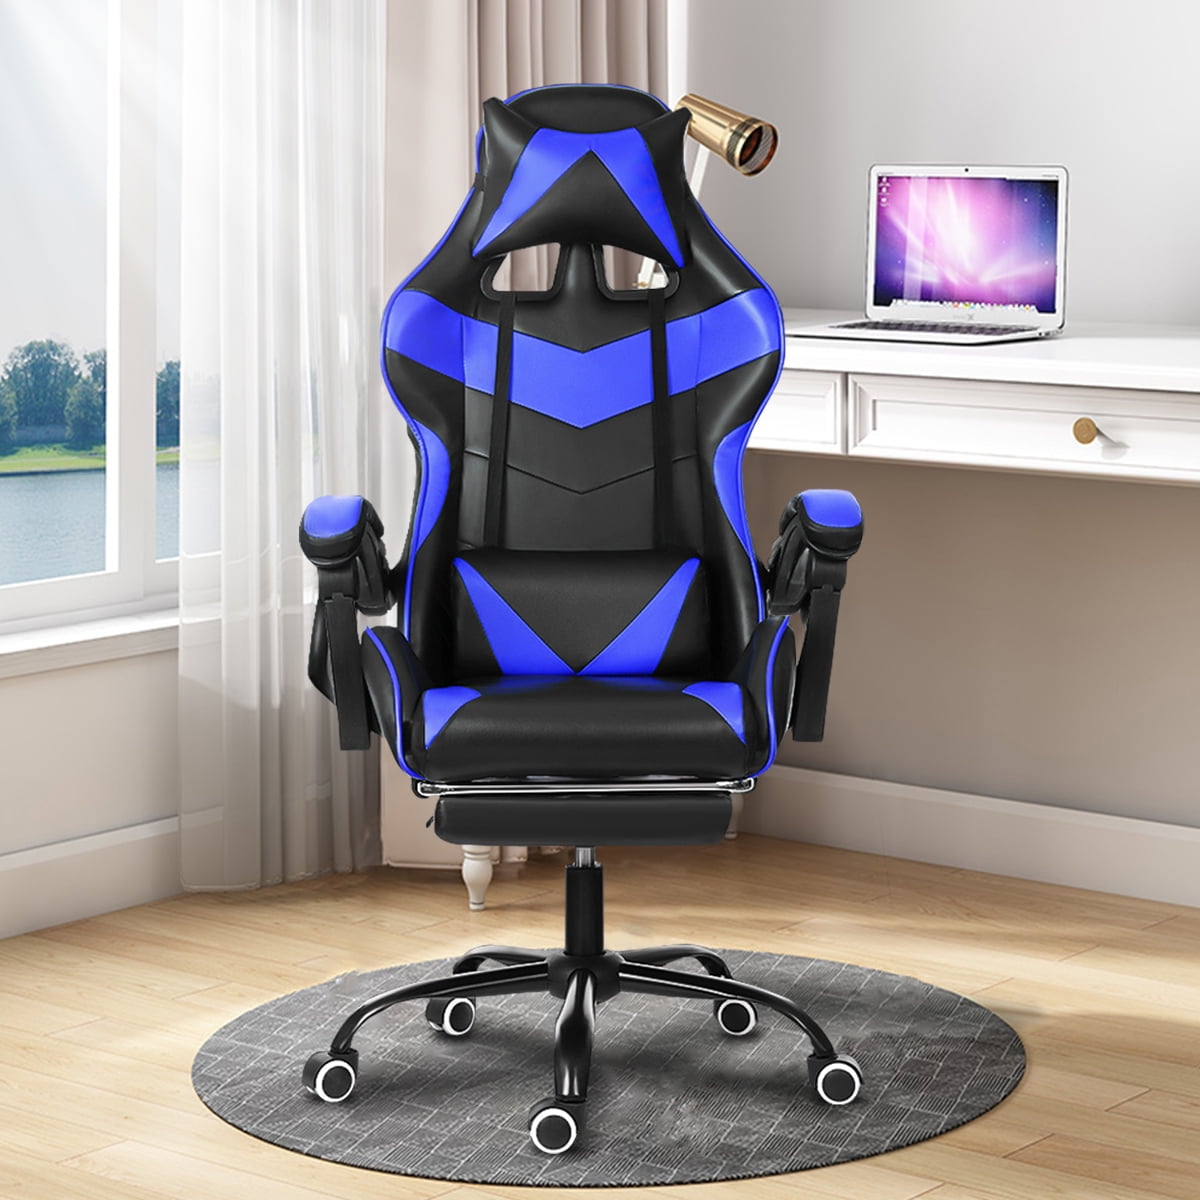 Unique Computer Gaming Chair Walmart for Simple Design